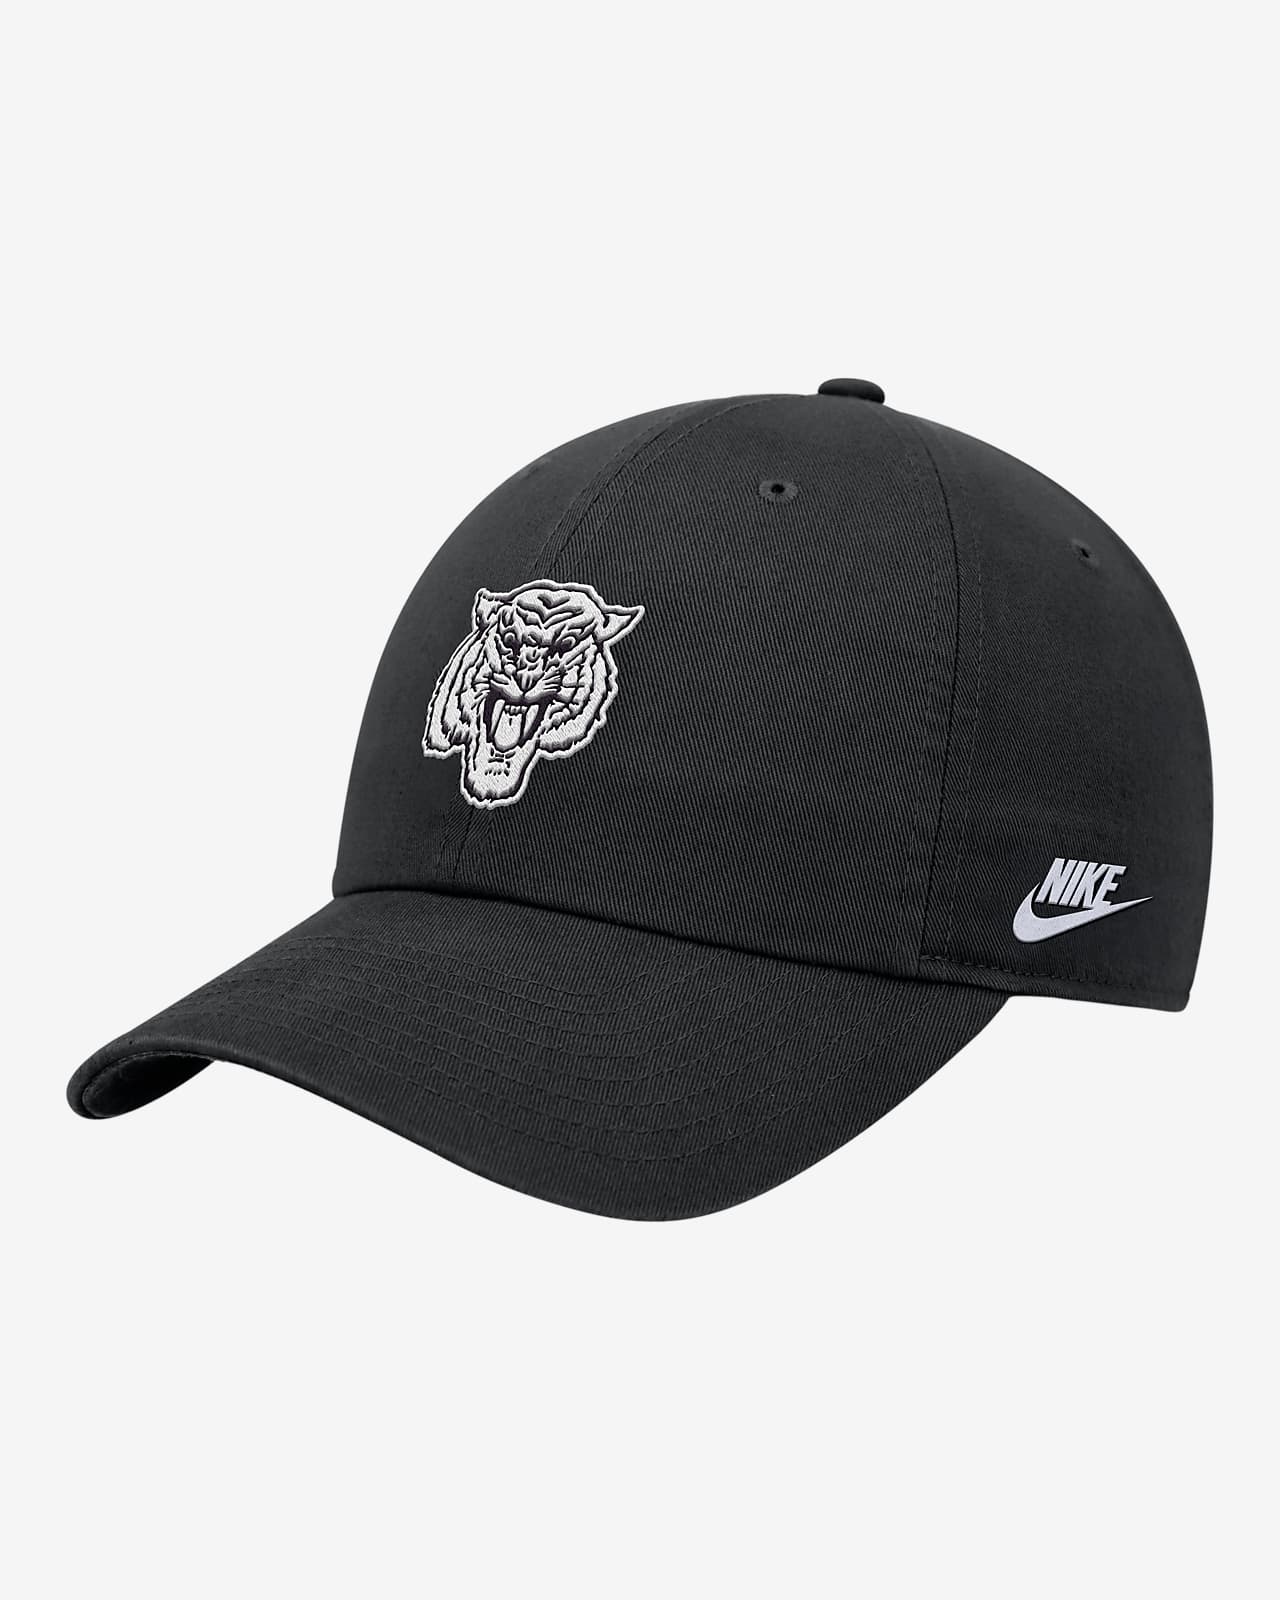 Morehouse Nike College Adjustable Cap